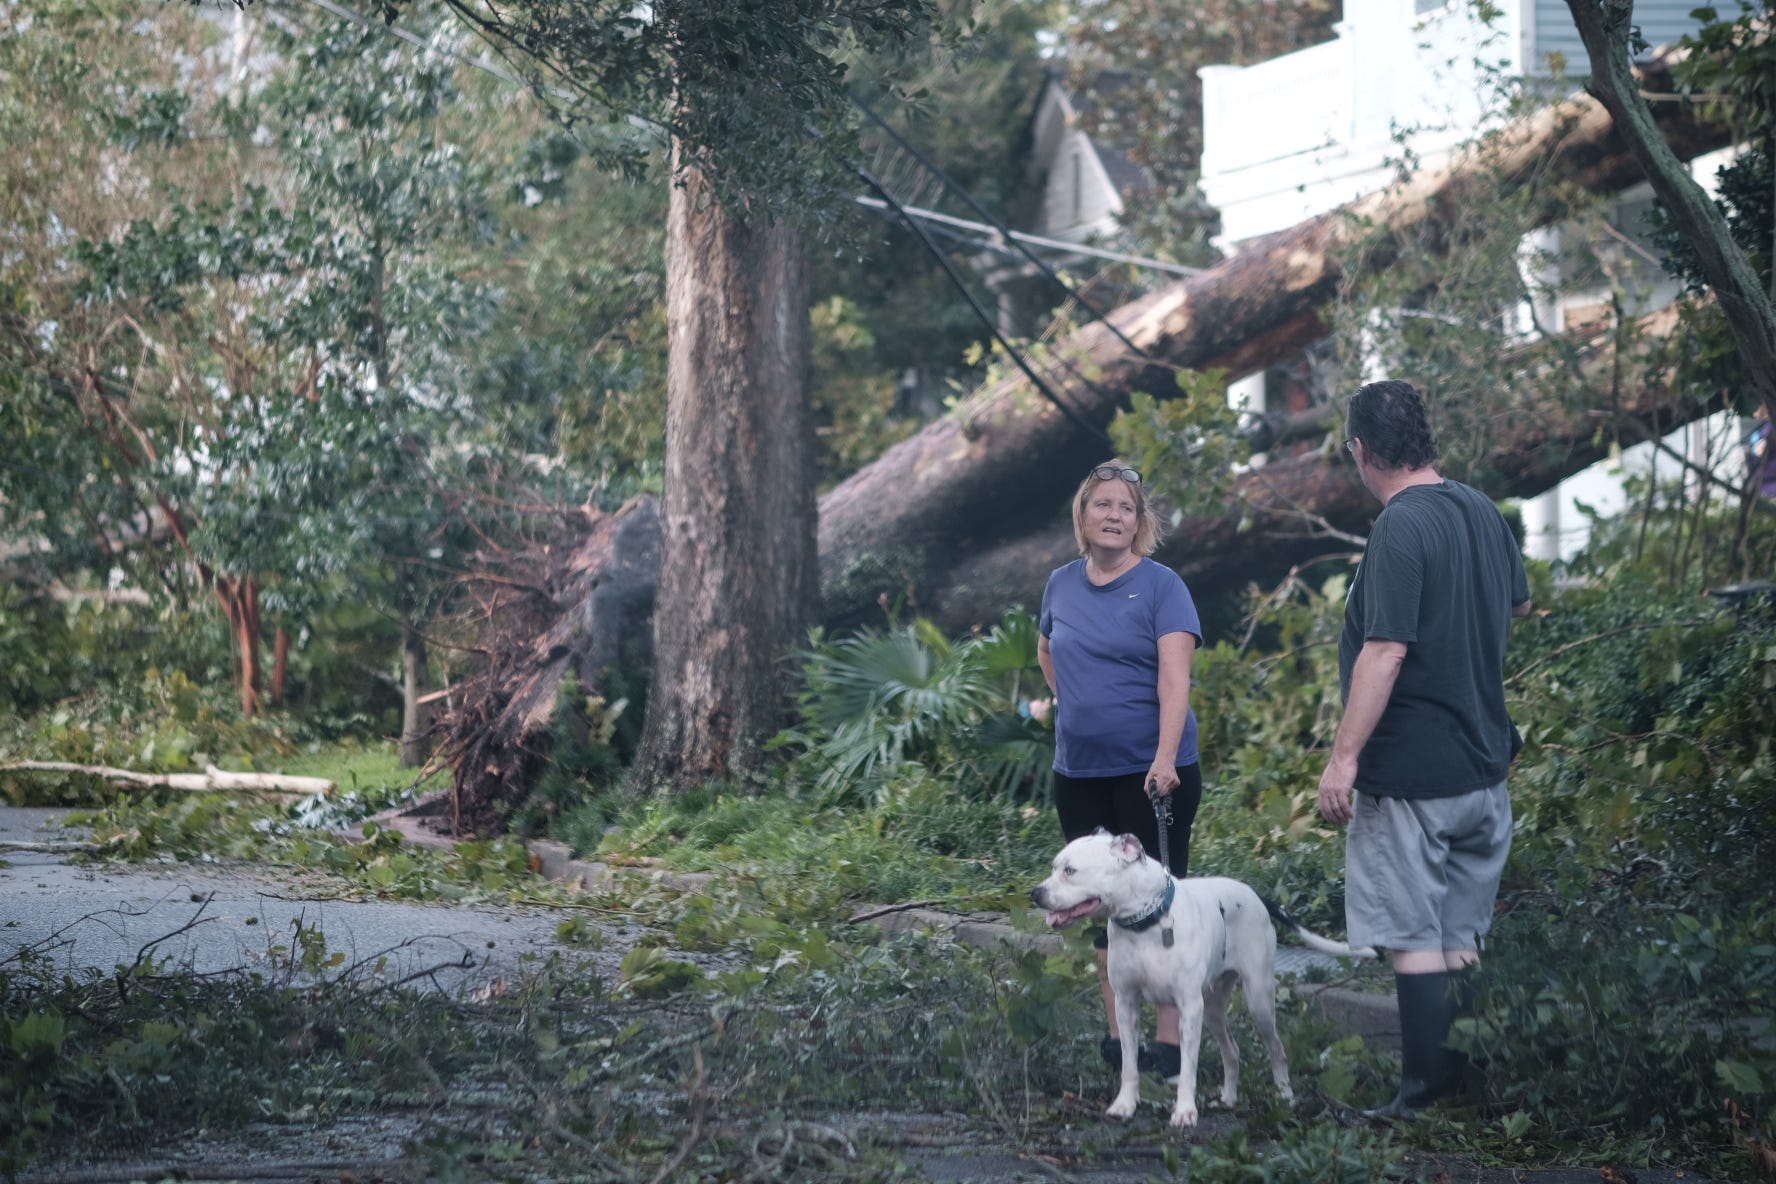 A pair is seen with a dog next to fallen trees.